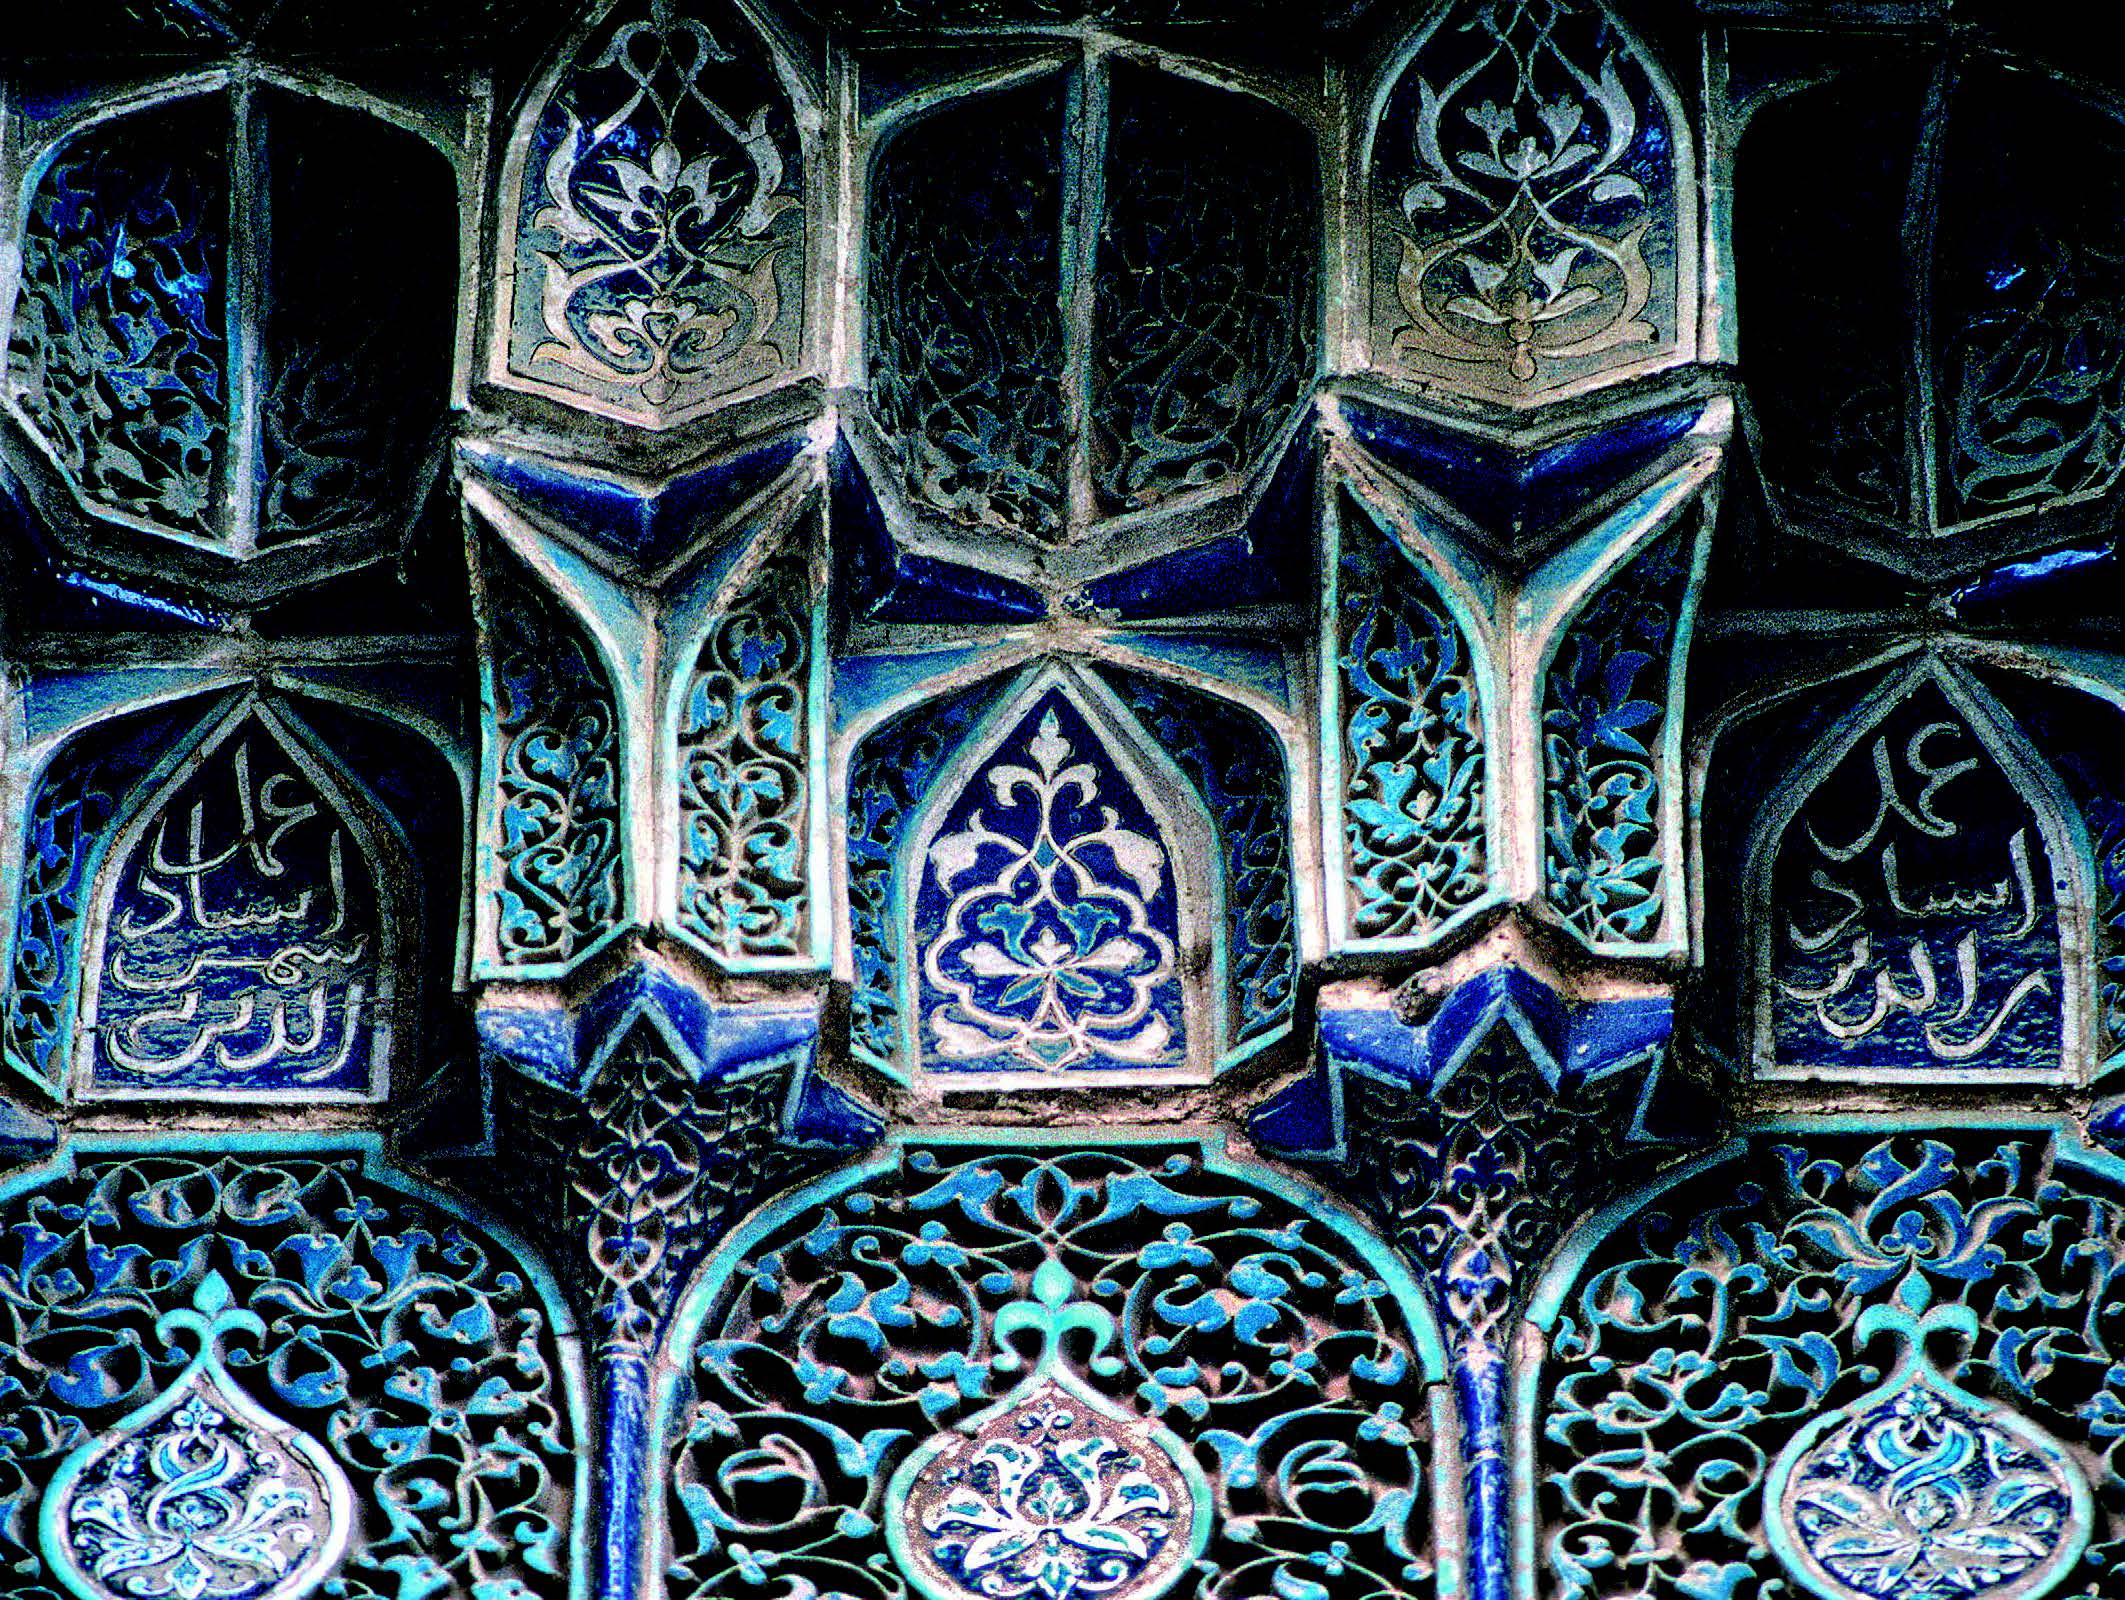 SAMARKAND, UZBEKISTAN: SHAH-I-ZINDA Built in the 1370s CE in honor of Seljuk ruler Amir Timur’s niece, this small structure is decorated with an astonishing variety of brilliantly glazed tiles, both flat and three-dimensional, in both dark and light blue and white. Unusually, two inscriptions name the builders. Another, below the muqarnas, declares: “This ceiling, full of muqarnas, and this gilded vault remind one that every design and every craft you see in this world is by the grace of the Creator.”